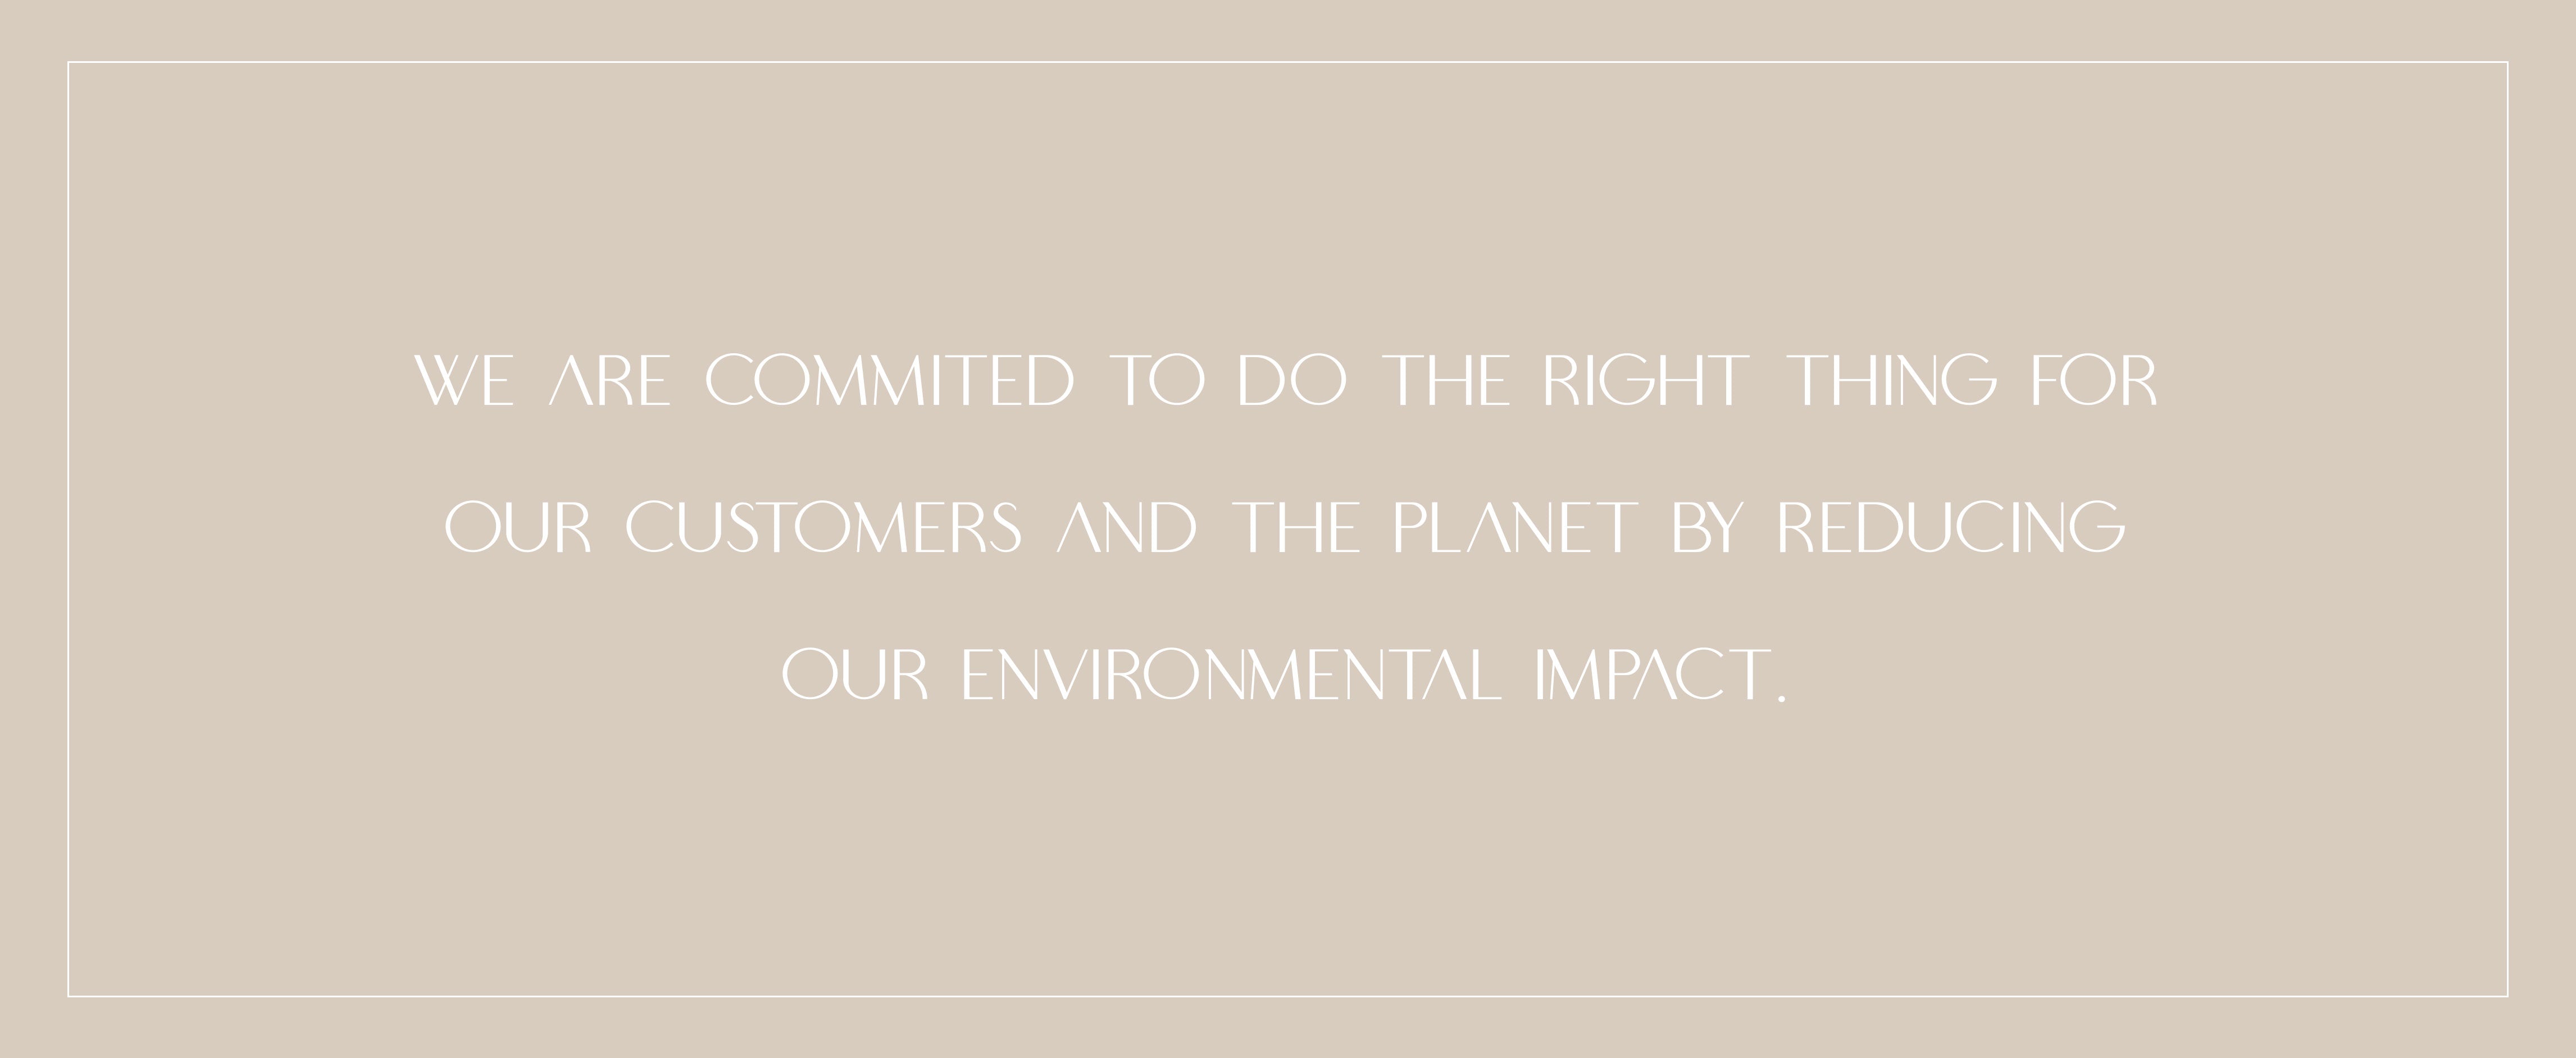 we are committed to do the right thing for our customers and our planet by reducing our environmental impact